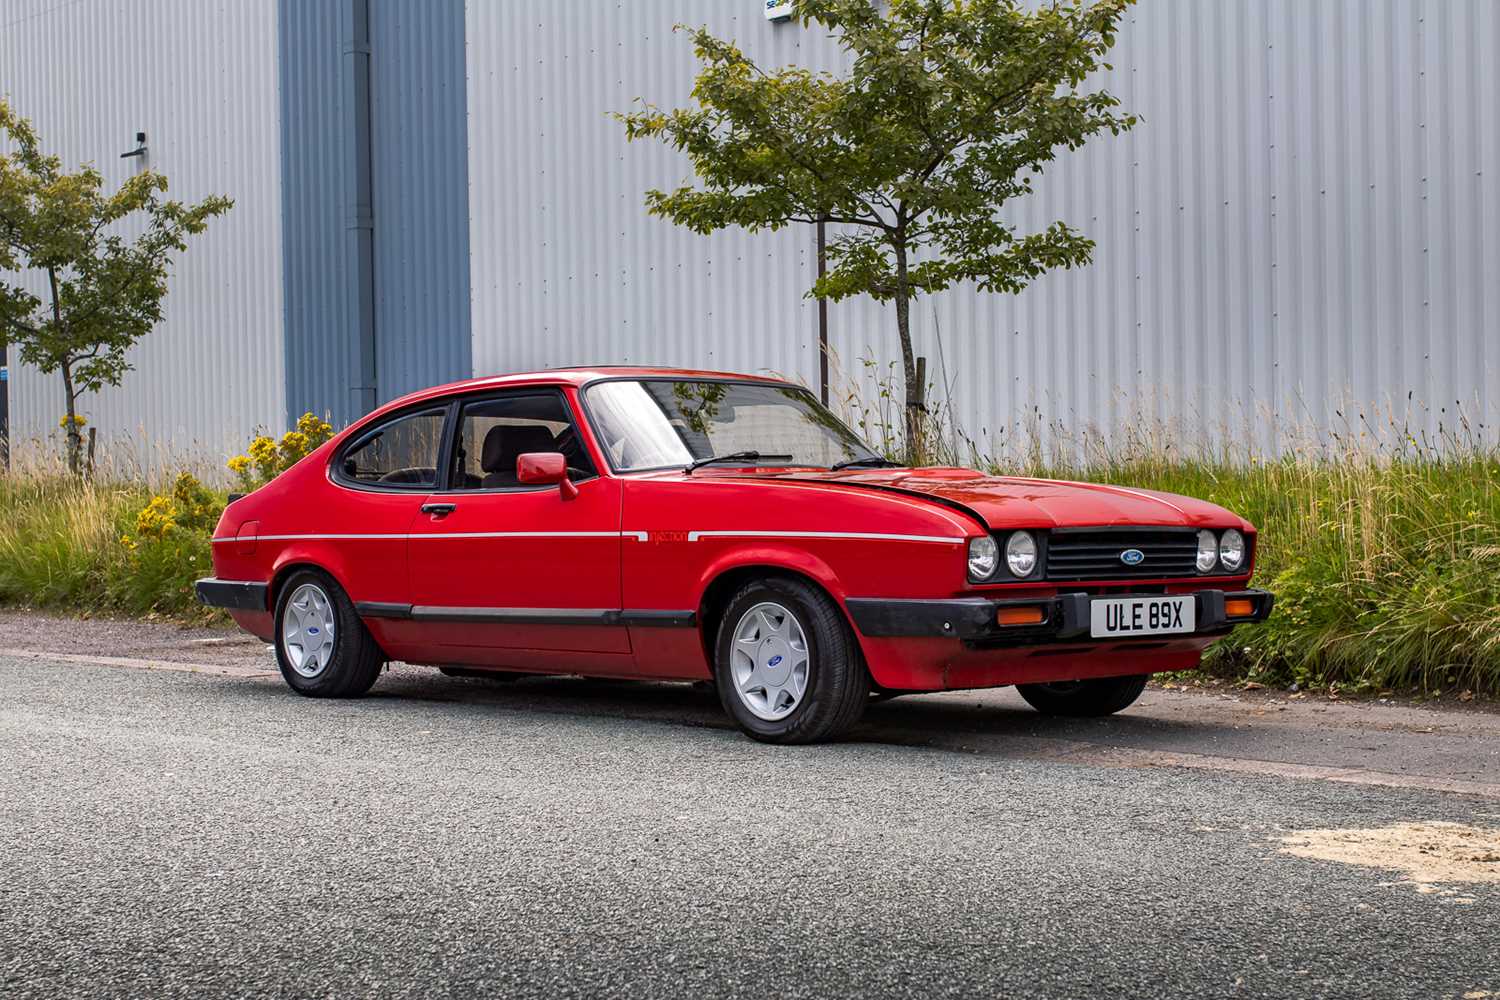 Gorgeous 1974 Ford Capri over in - Performance Wheels